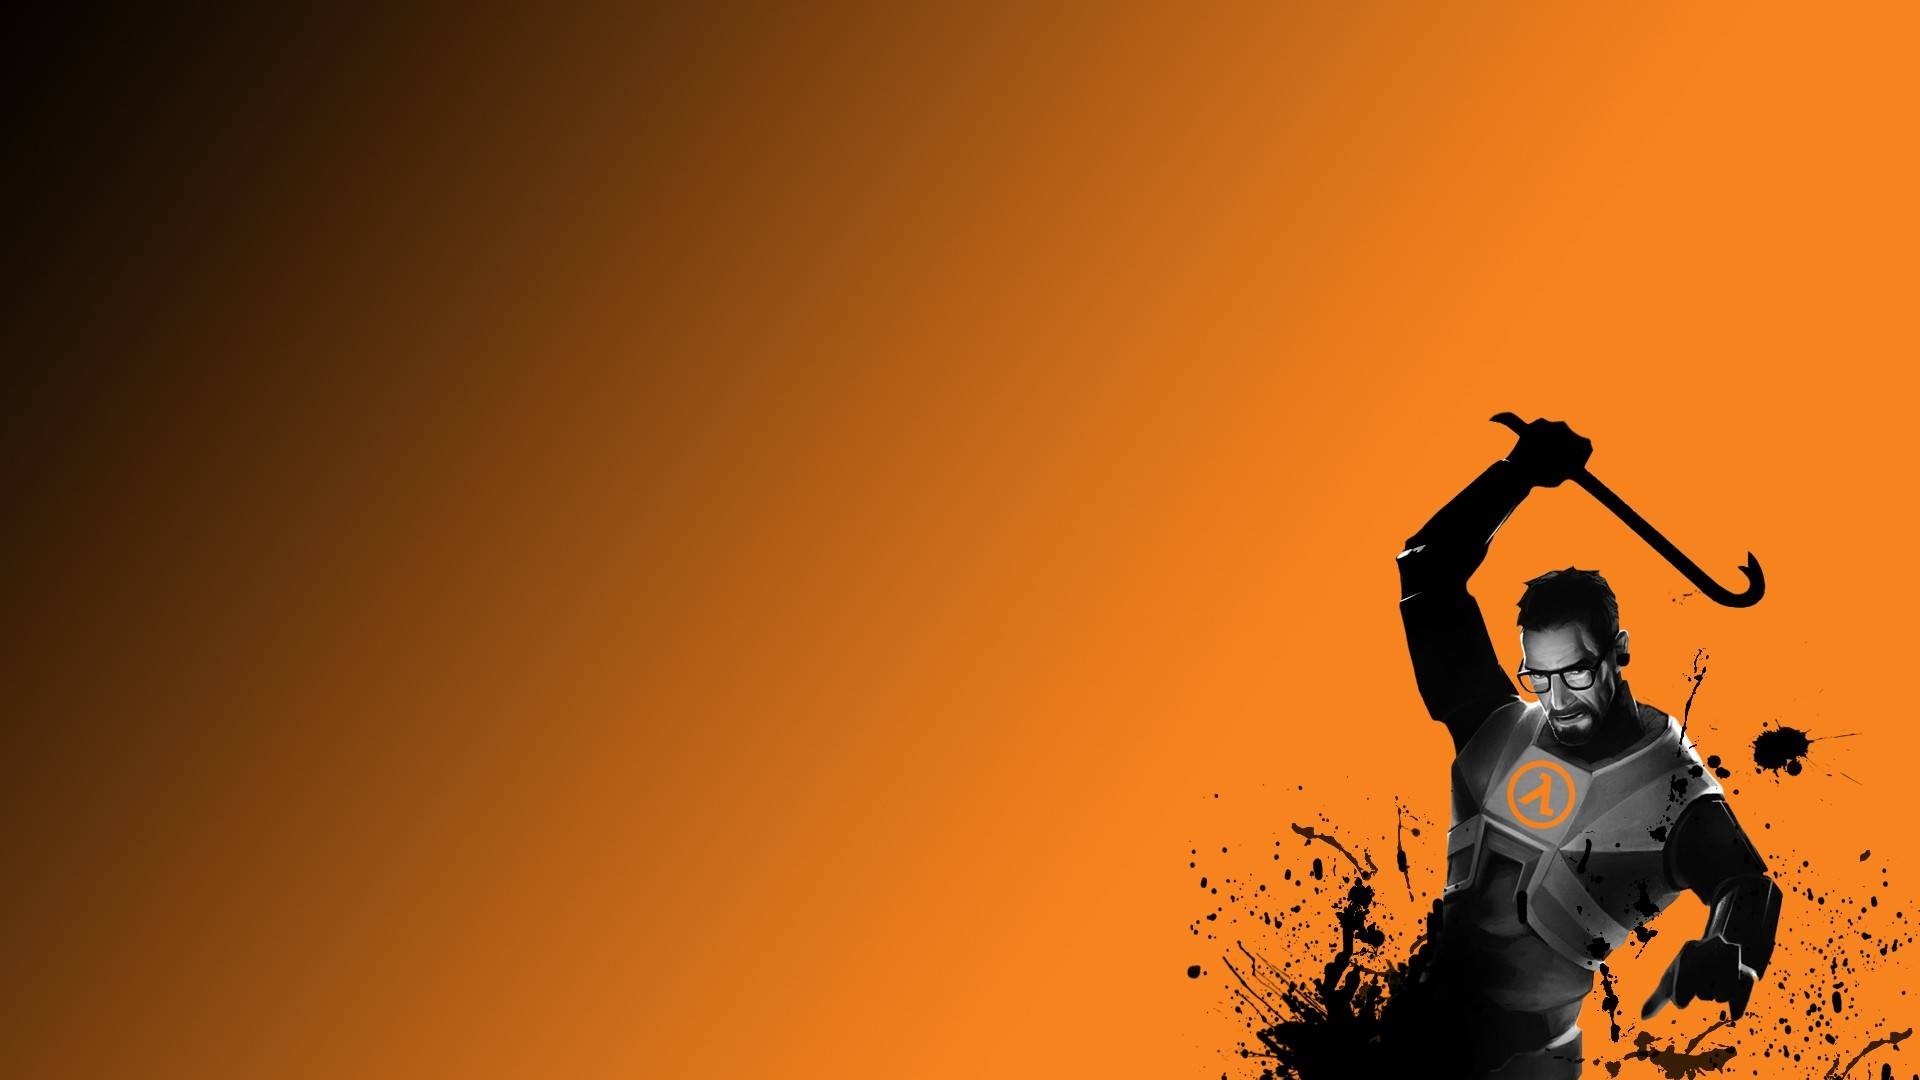 wallpaper related to life,orange,music,musical instrument